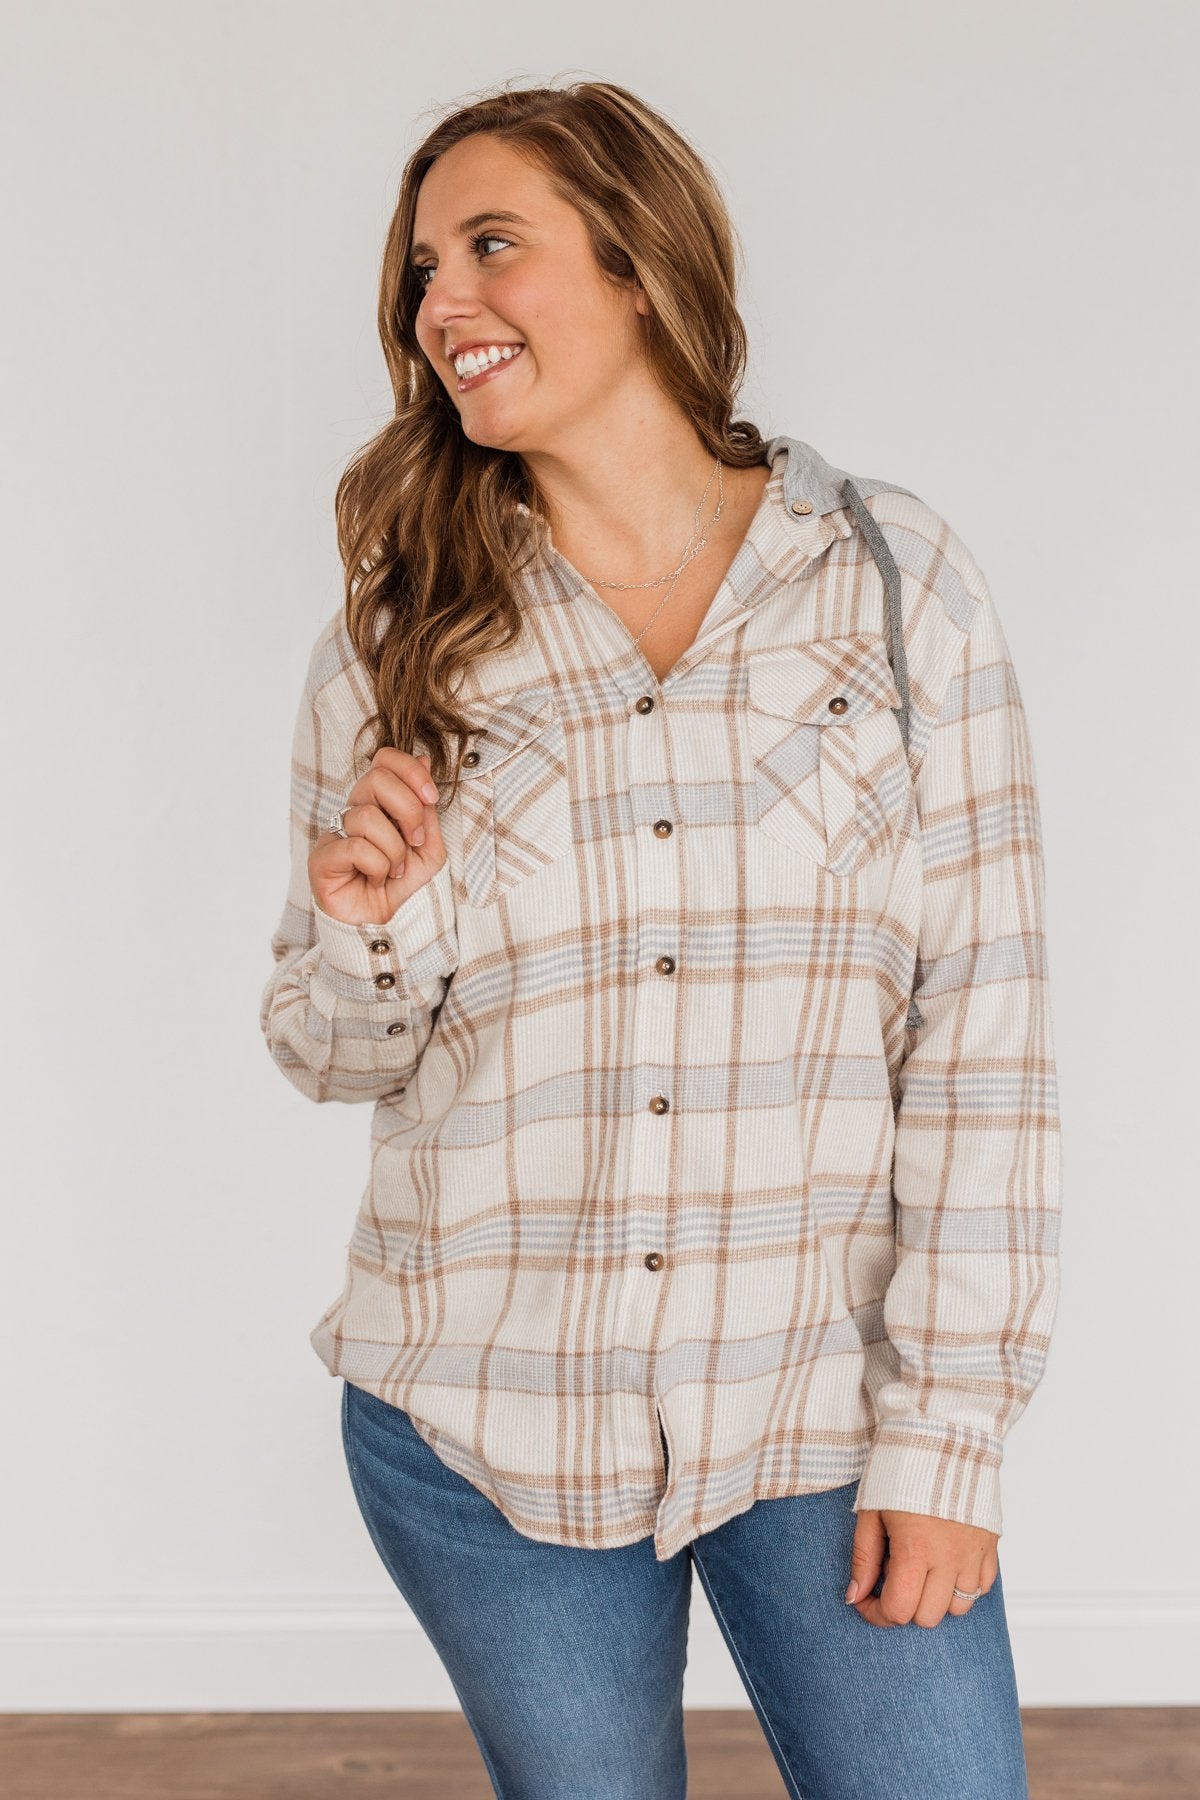 Autumn Is Calling Hooded Plaid Top- Oatmeal, Taupe, & Blue